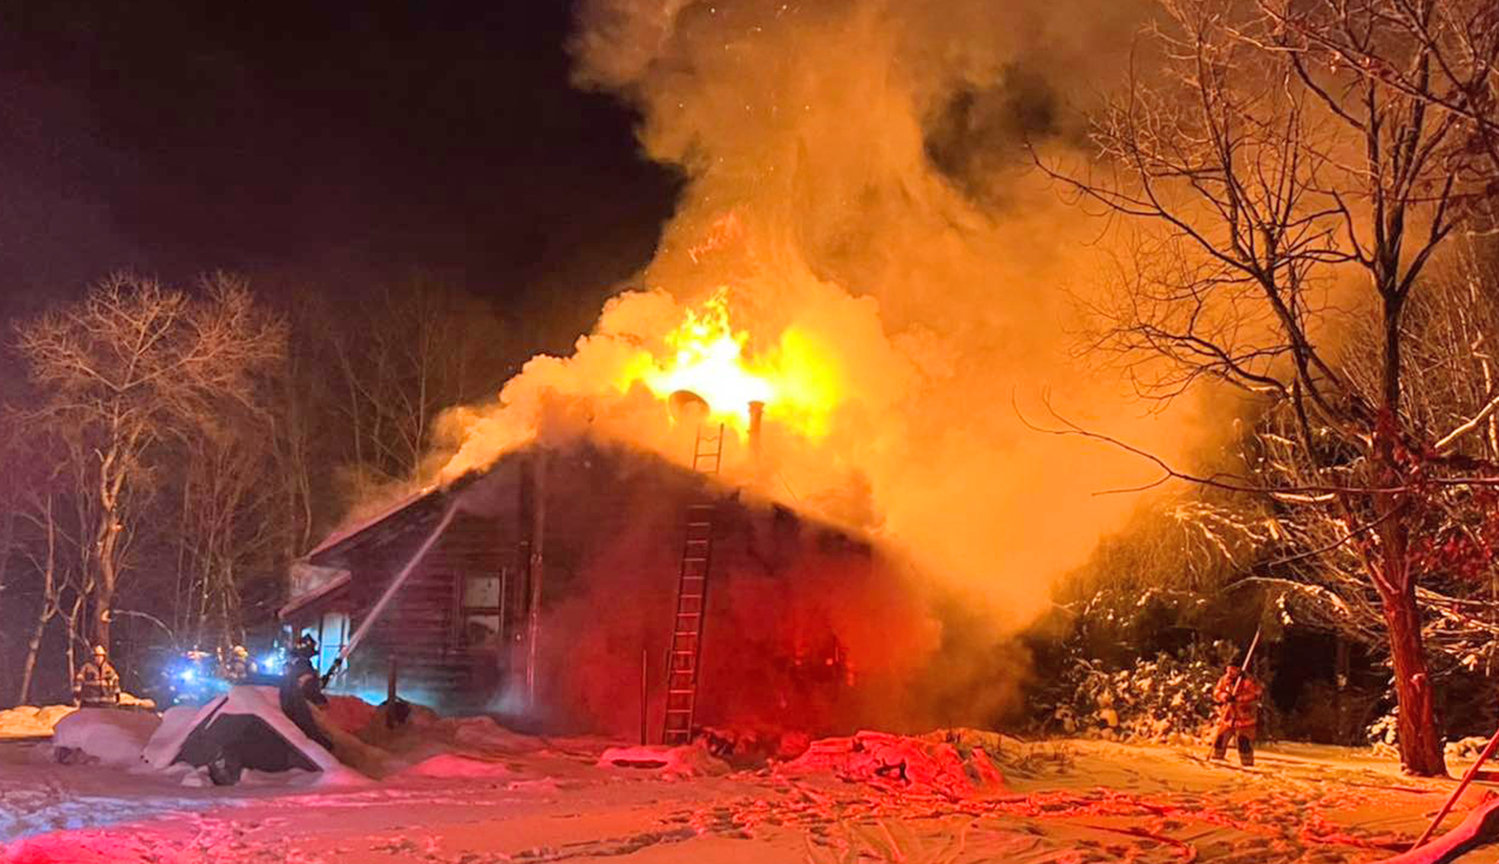 BURNING HOME — Firefighters battled this fire for at least two hours in very frigid temperatures at about 3 a.m. Sunday on Soule Road in the Town of Floyd.